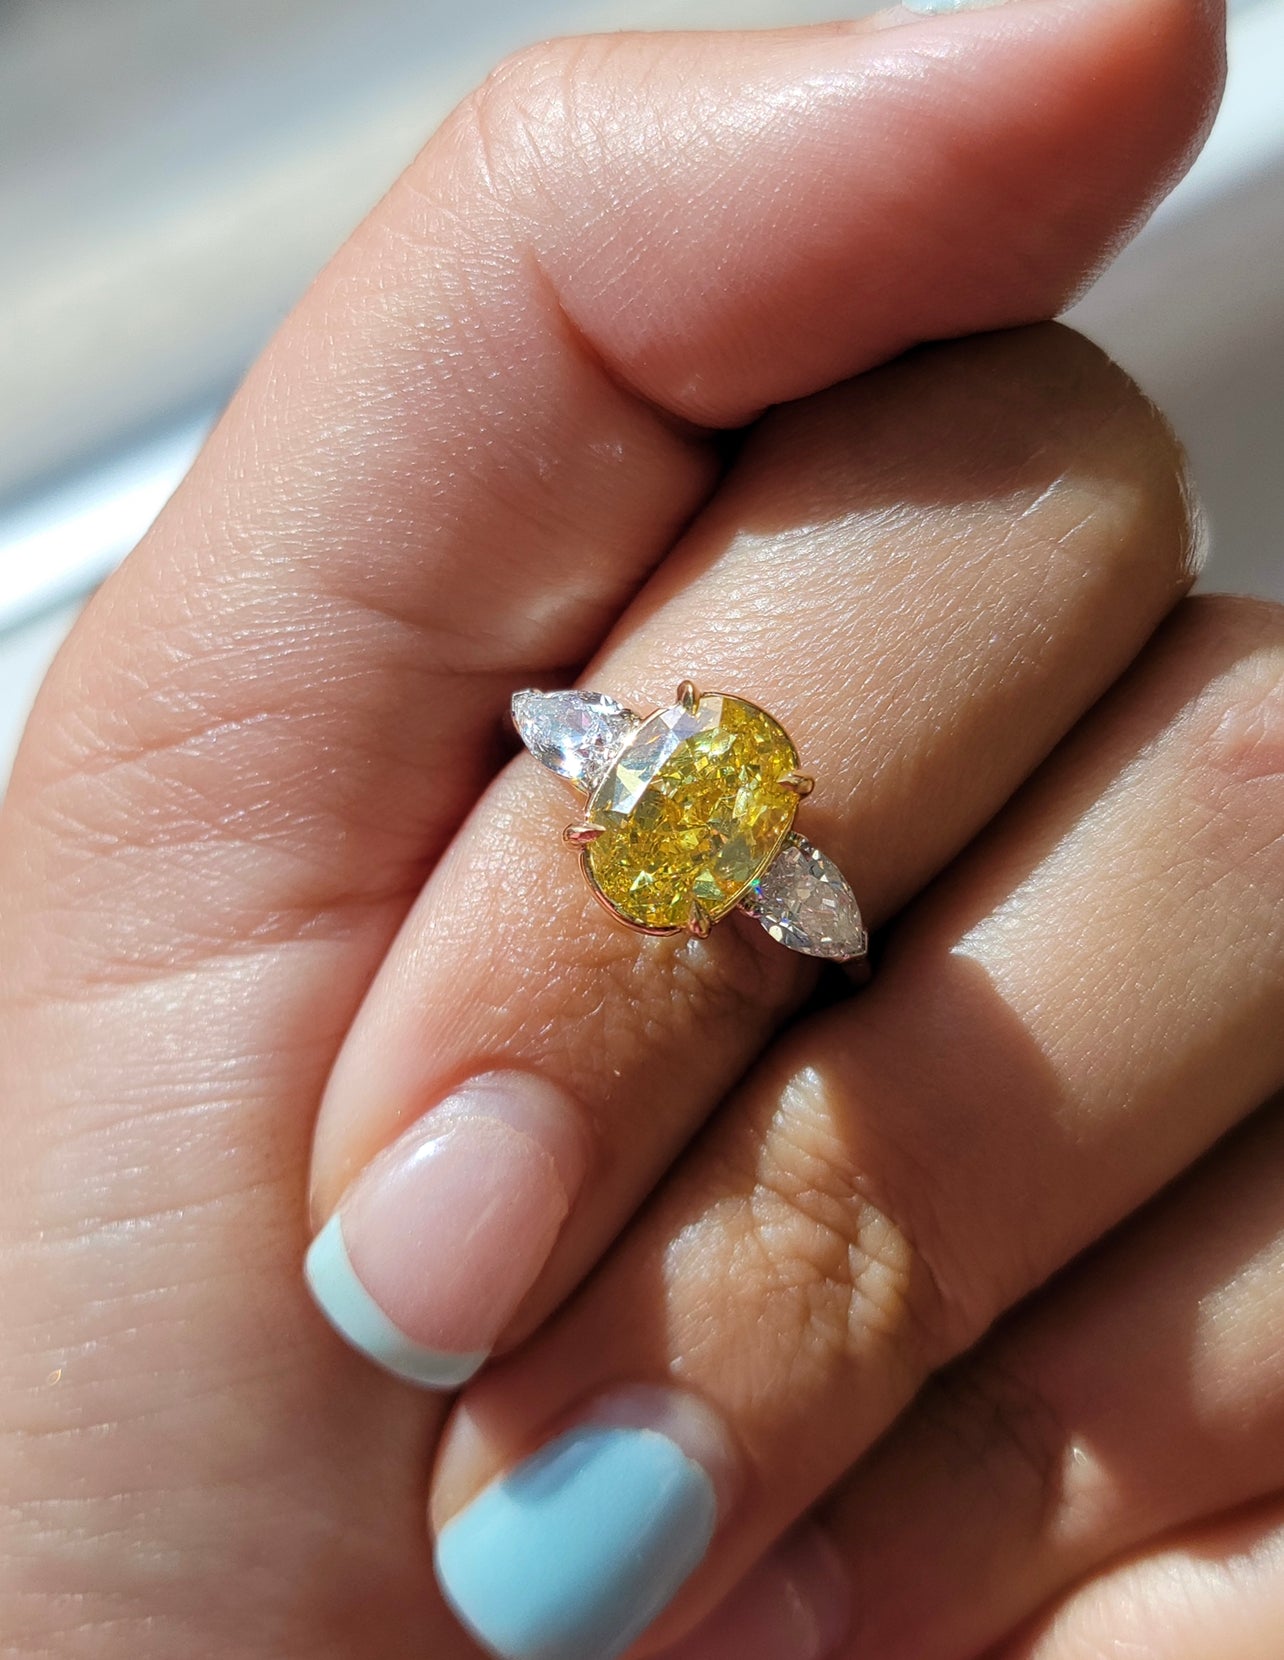 3.03ct Fancy Intense Yellow Oval SI1 GIA Ring